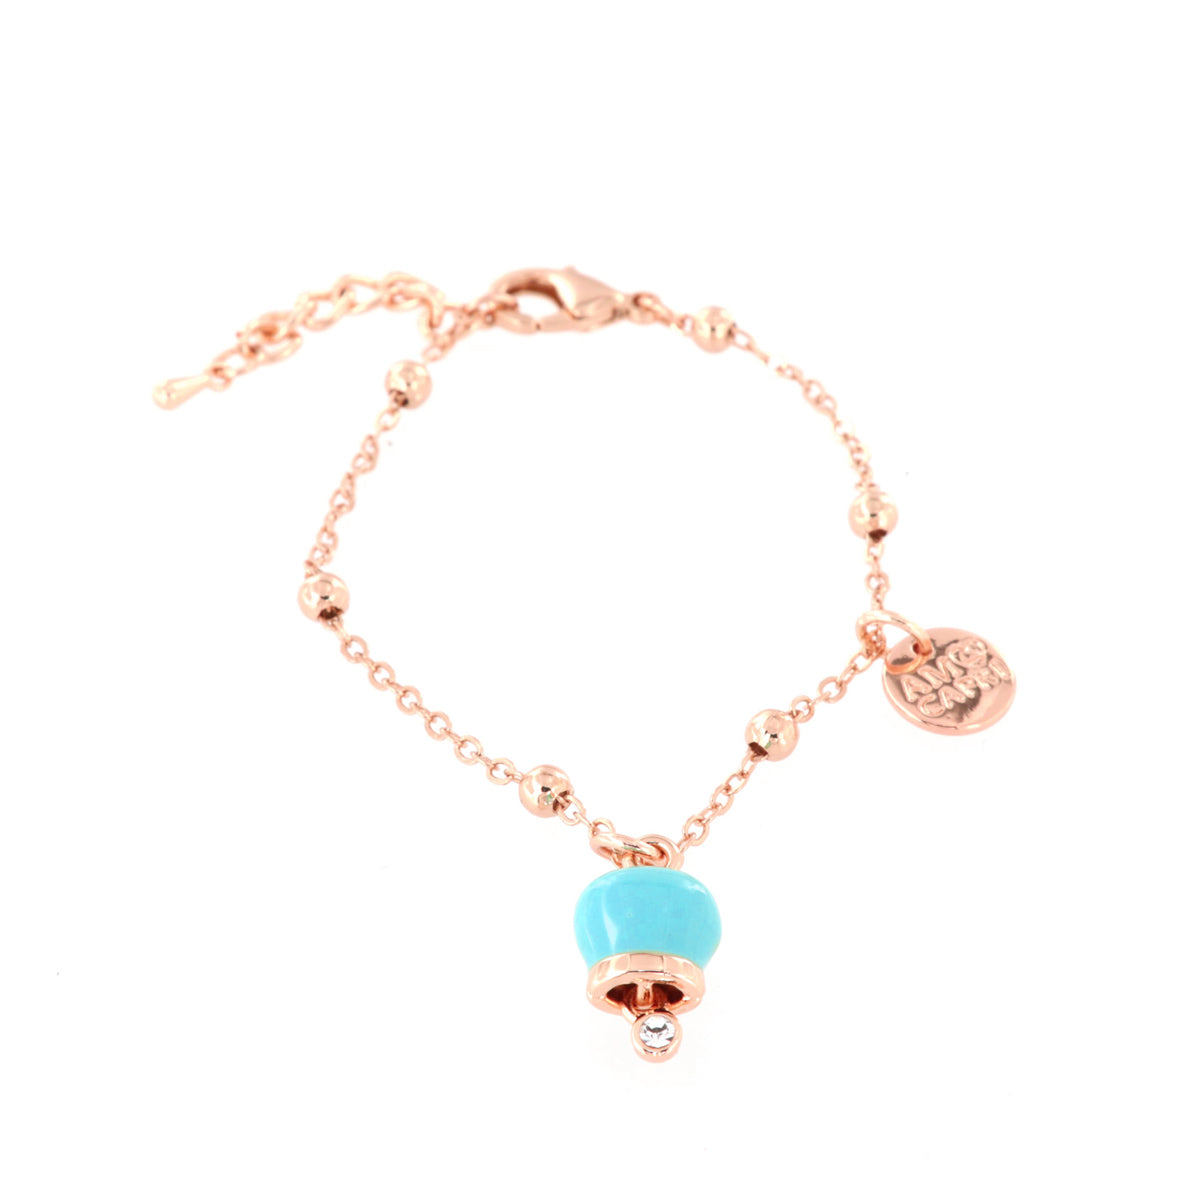 Metal bracelet with pendant lucky charm, embellished with turquoise enamel and light point